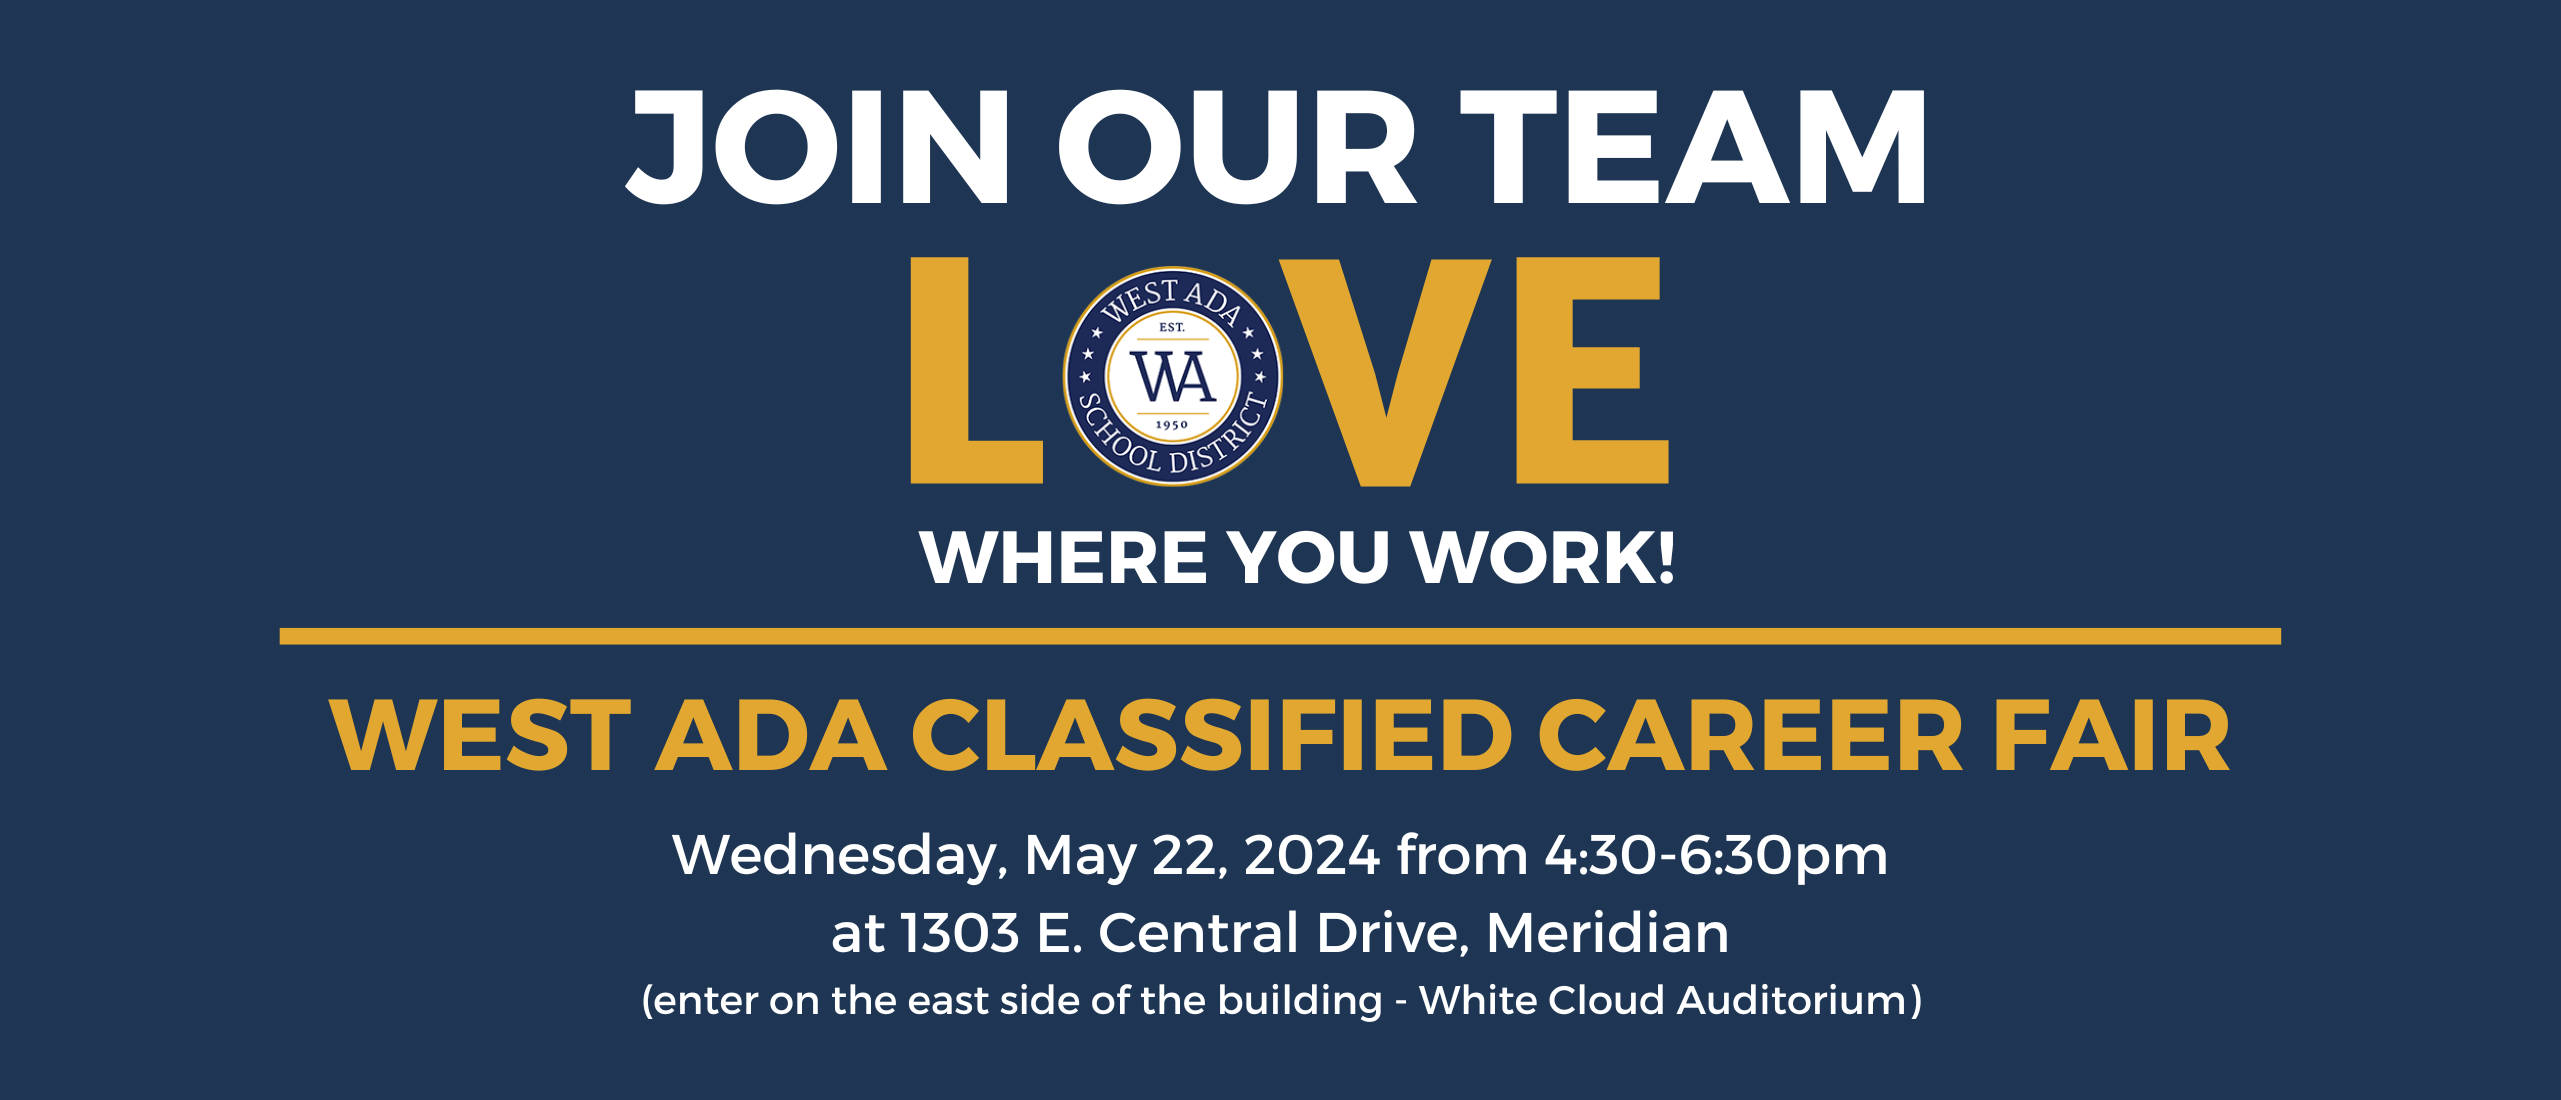 join our team - love where you work - west ada classified career fair